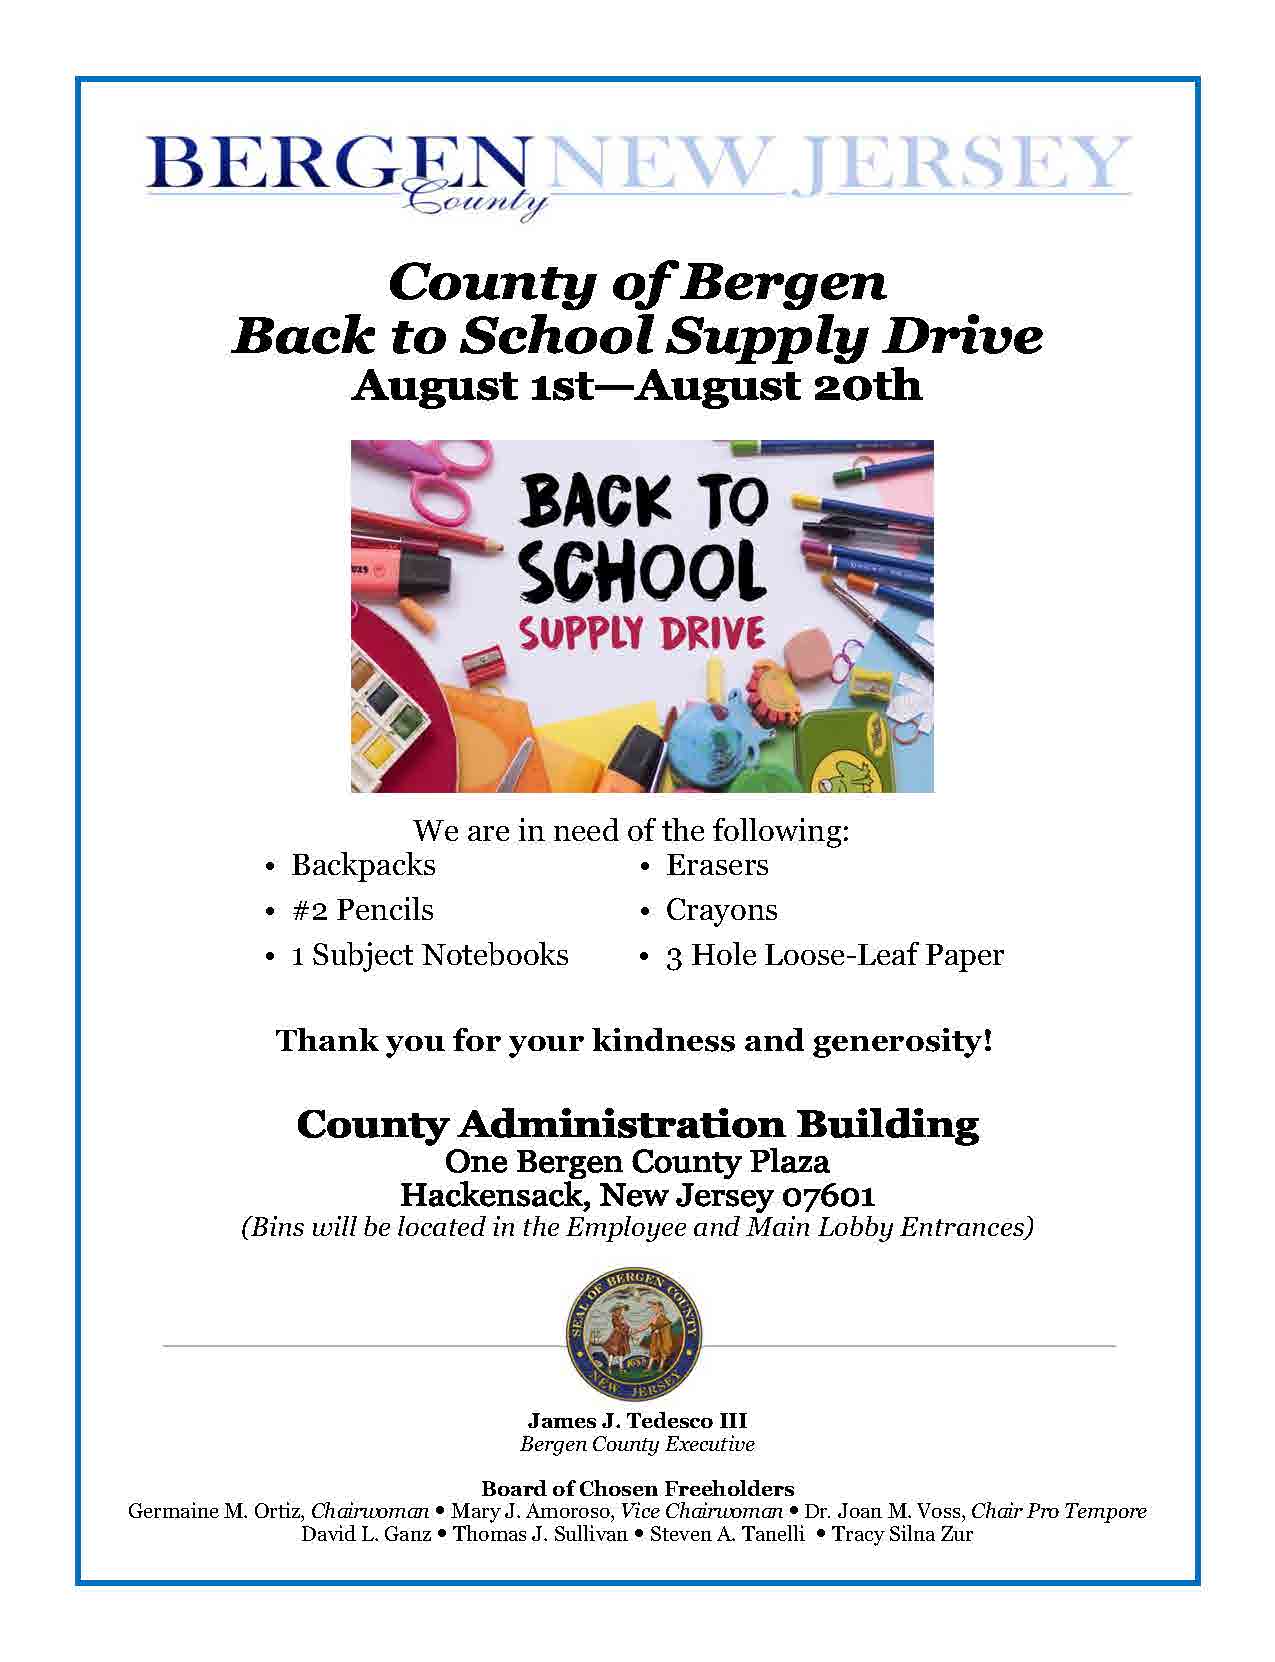 Back to School Supply Drive Flyer